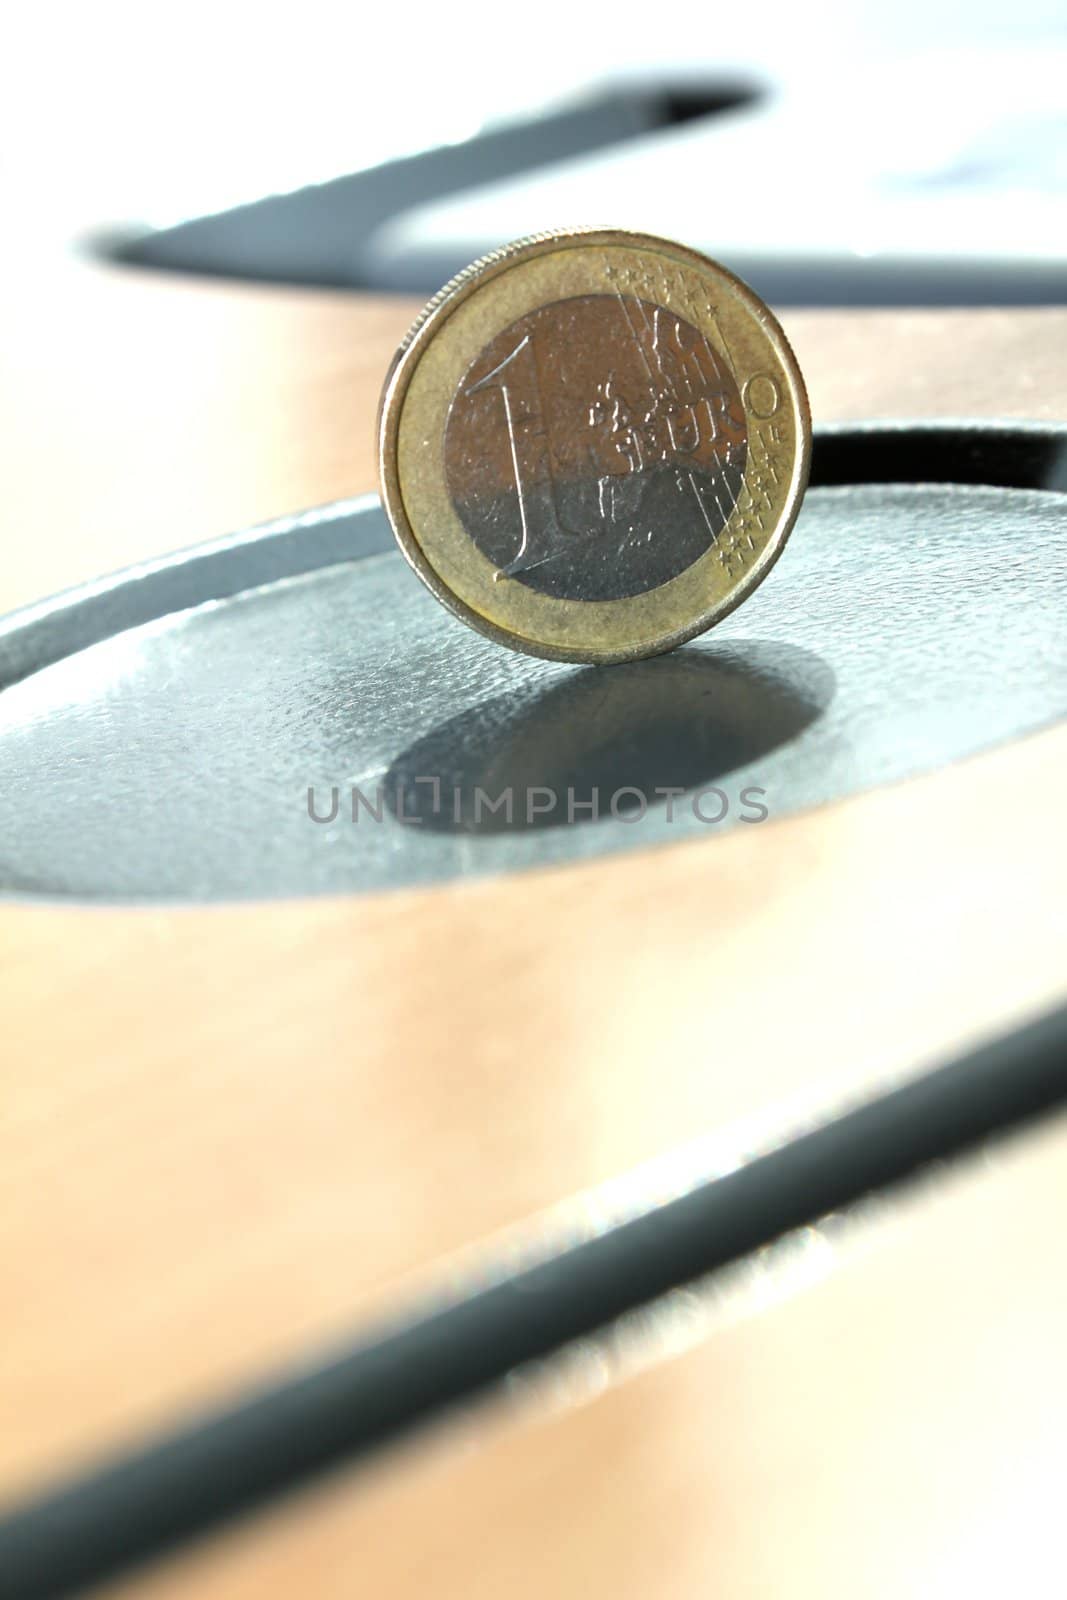 one euro coin by Teka77